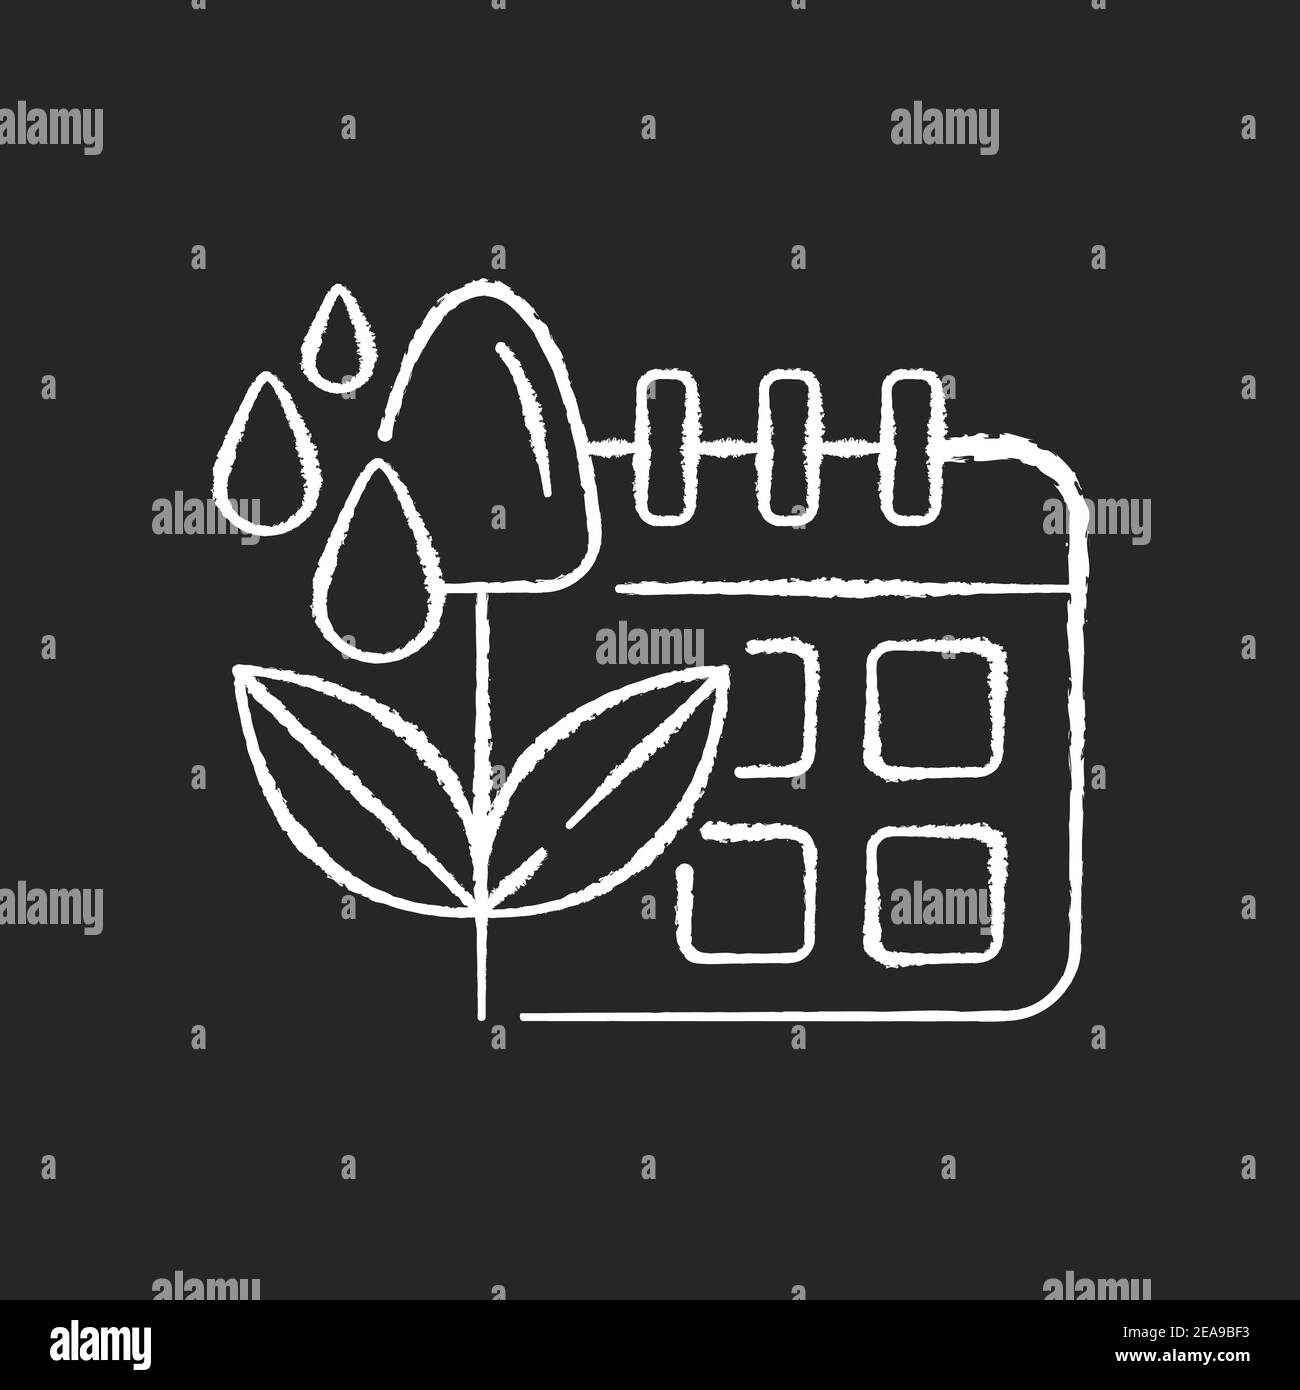 Irrigation scheduling chalk white icon on black background Stock Vector